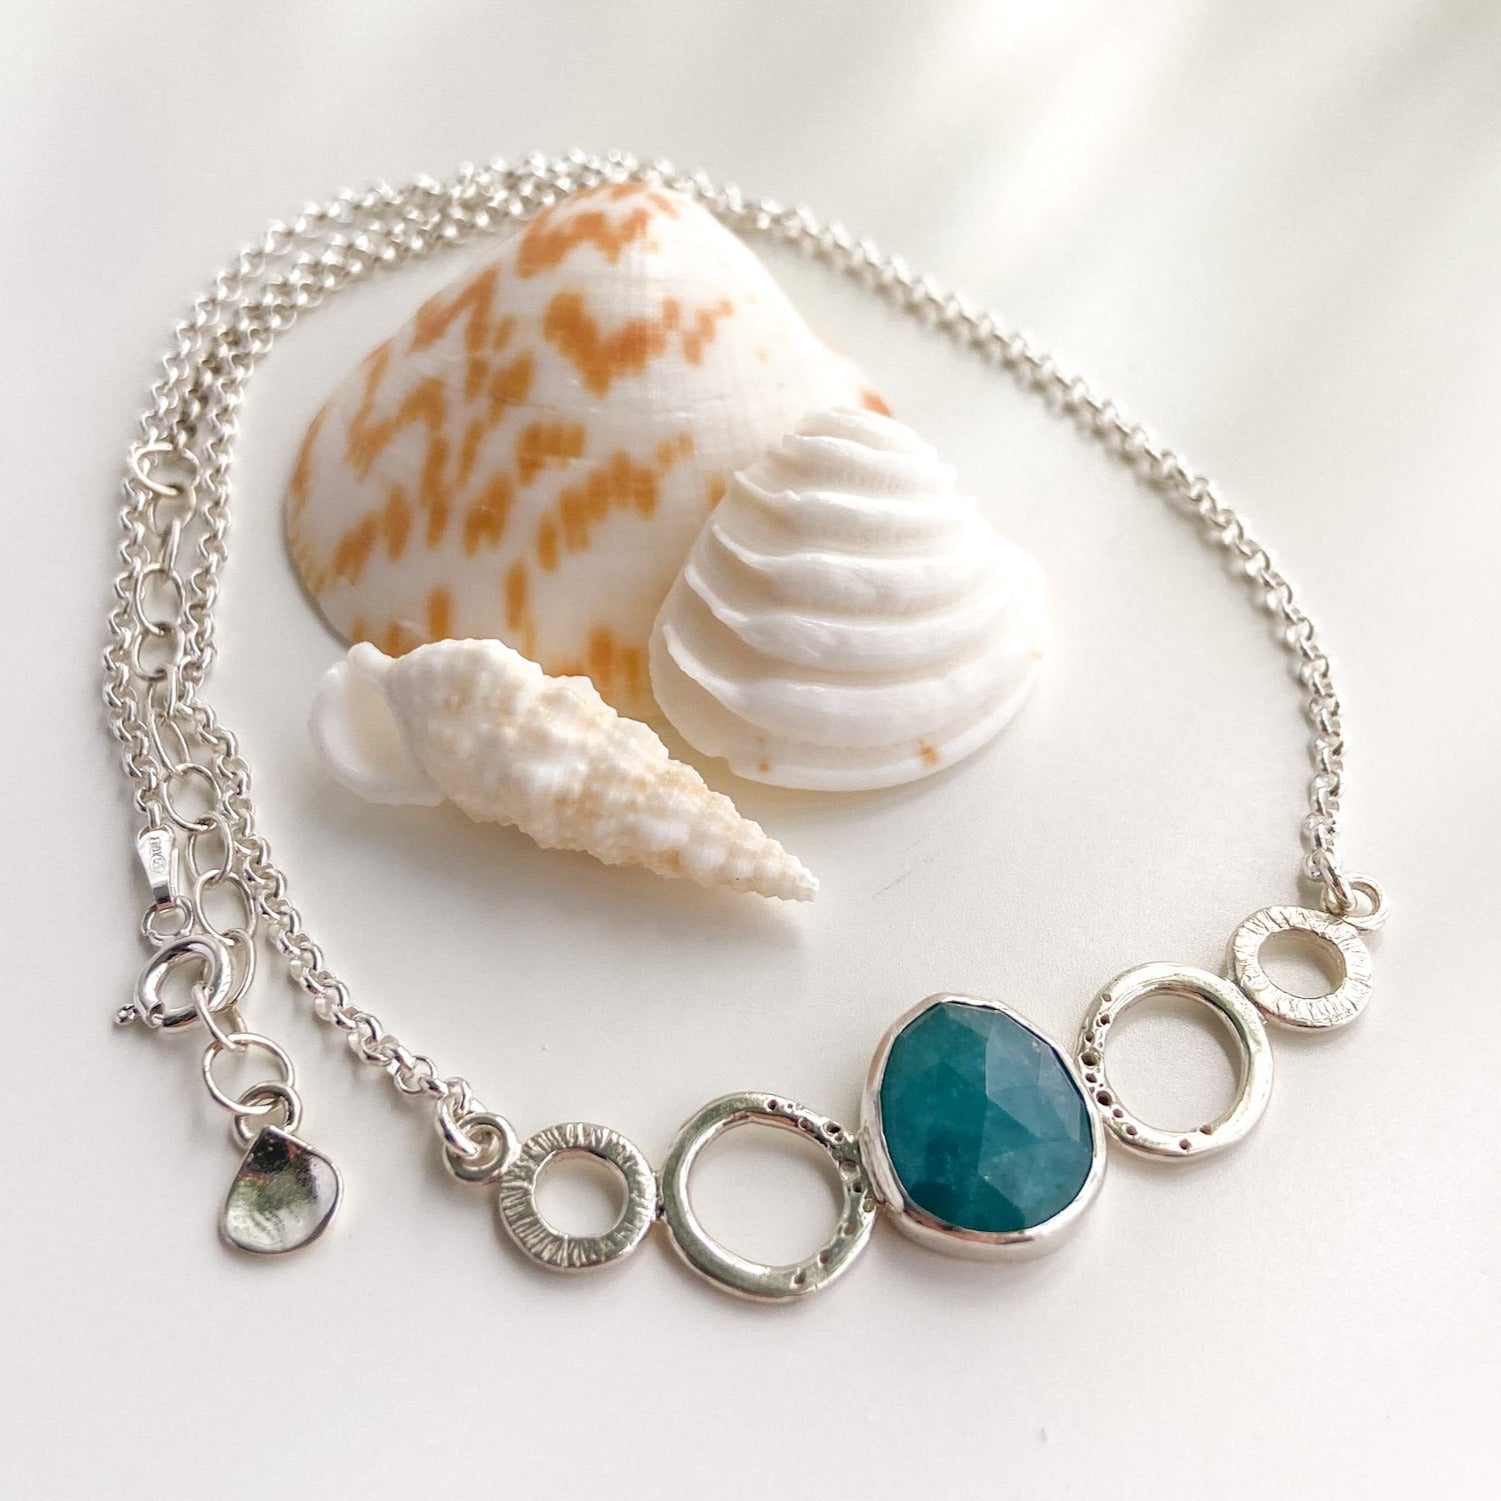 Teal green rose cut gandiderite gemstone and silver necklace displayed with shells